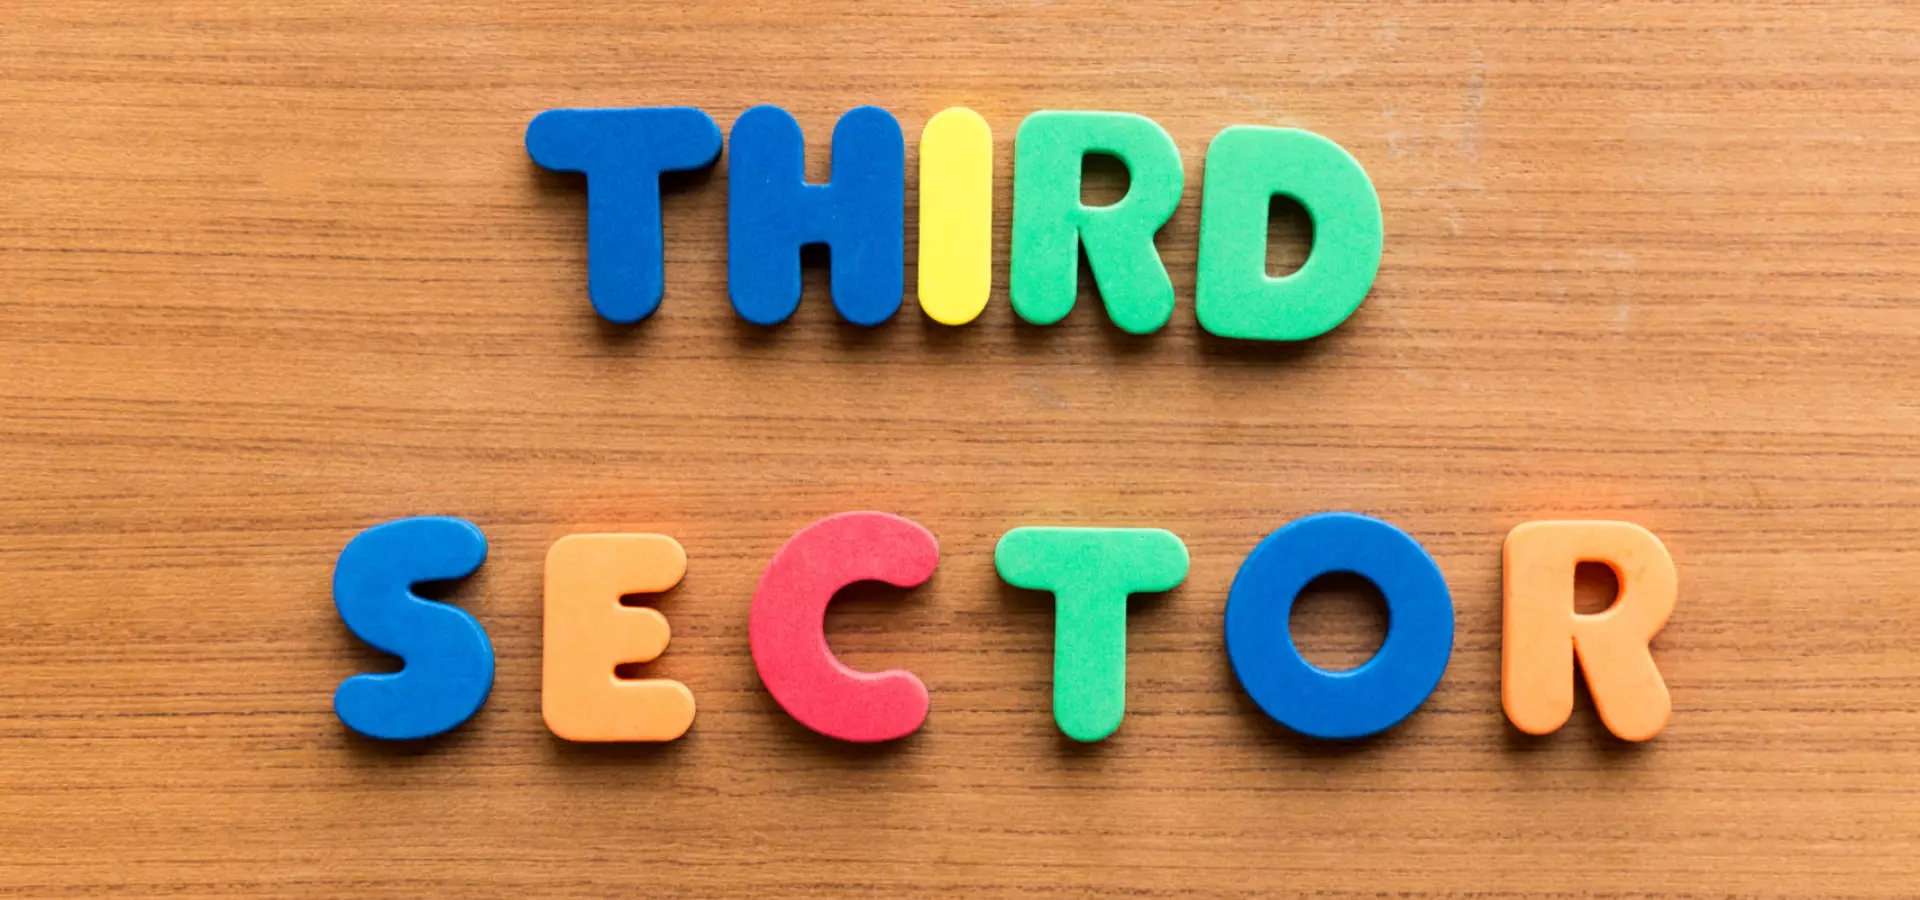 Words 'third sector' written in colourful plastic letters on a wooden background.